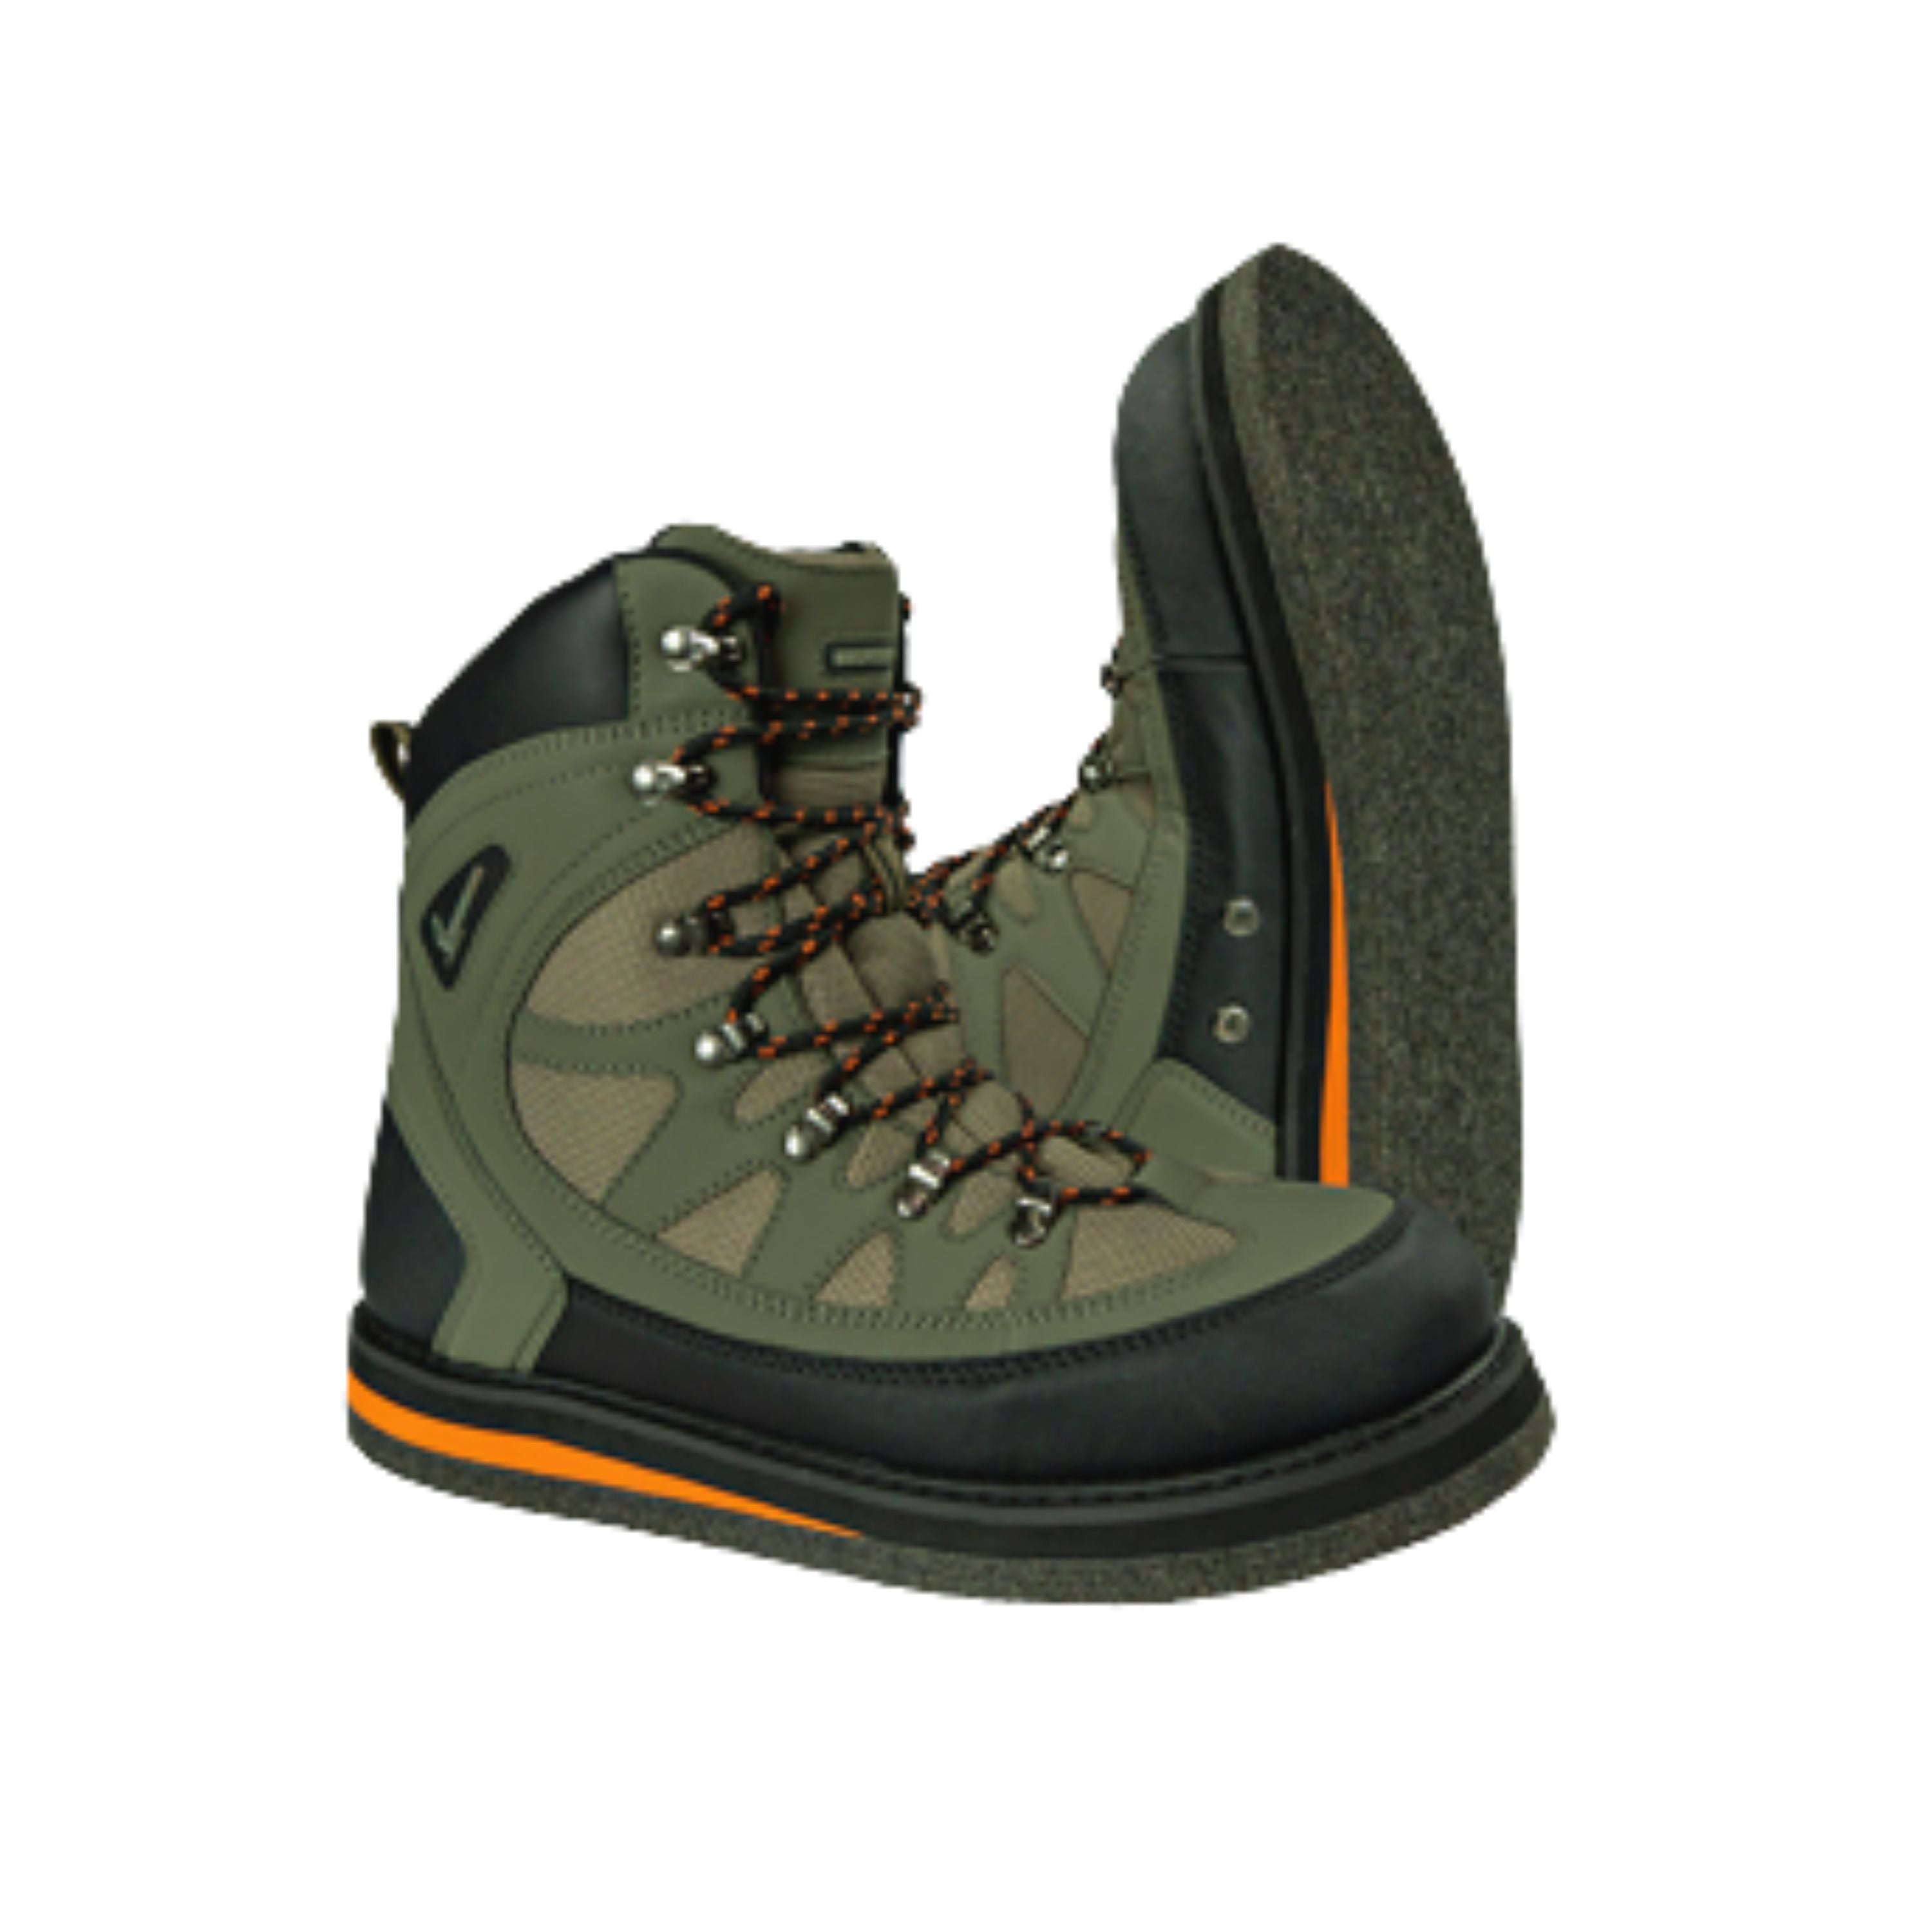 "TXS" Wading boots